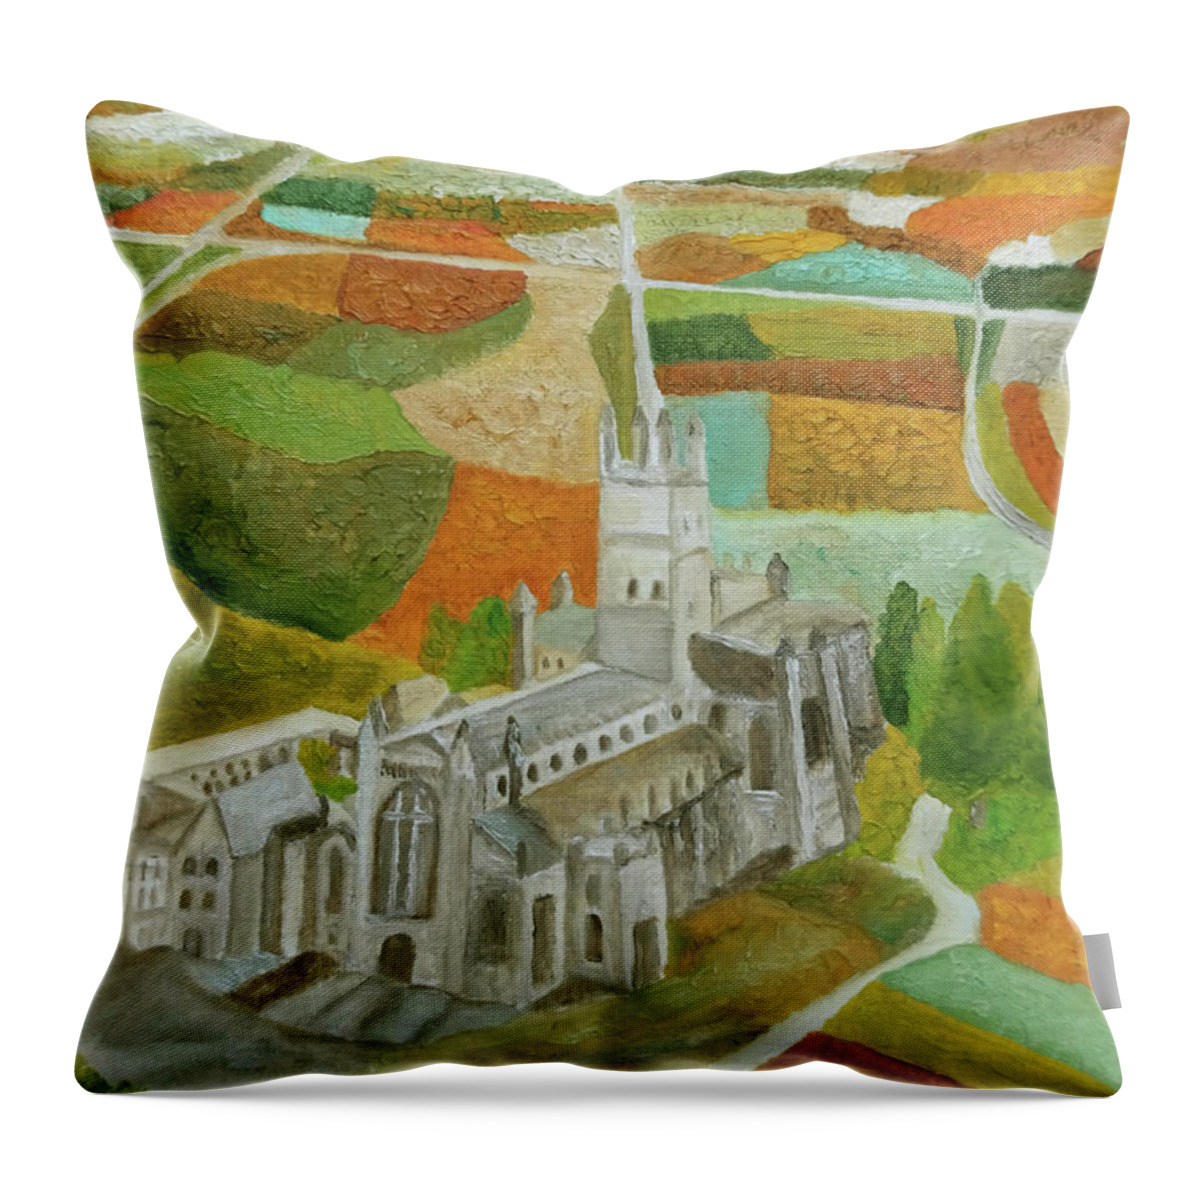 Gloucester Throw Pillow featuring the painting Cheltenham From The Gloucester Cathedral by Angeles M Pomata